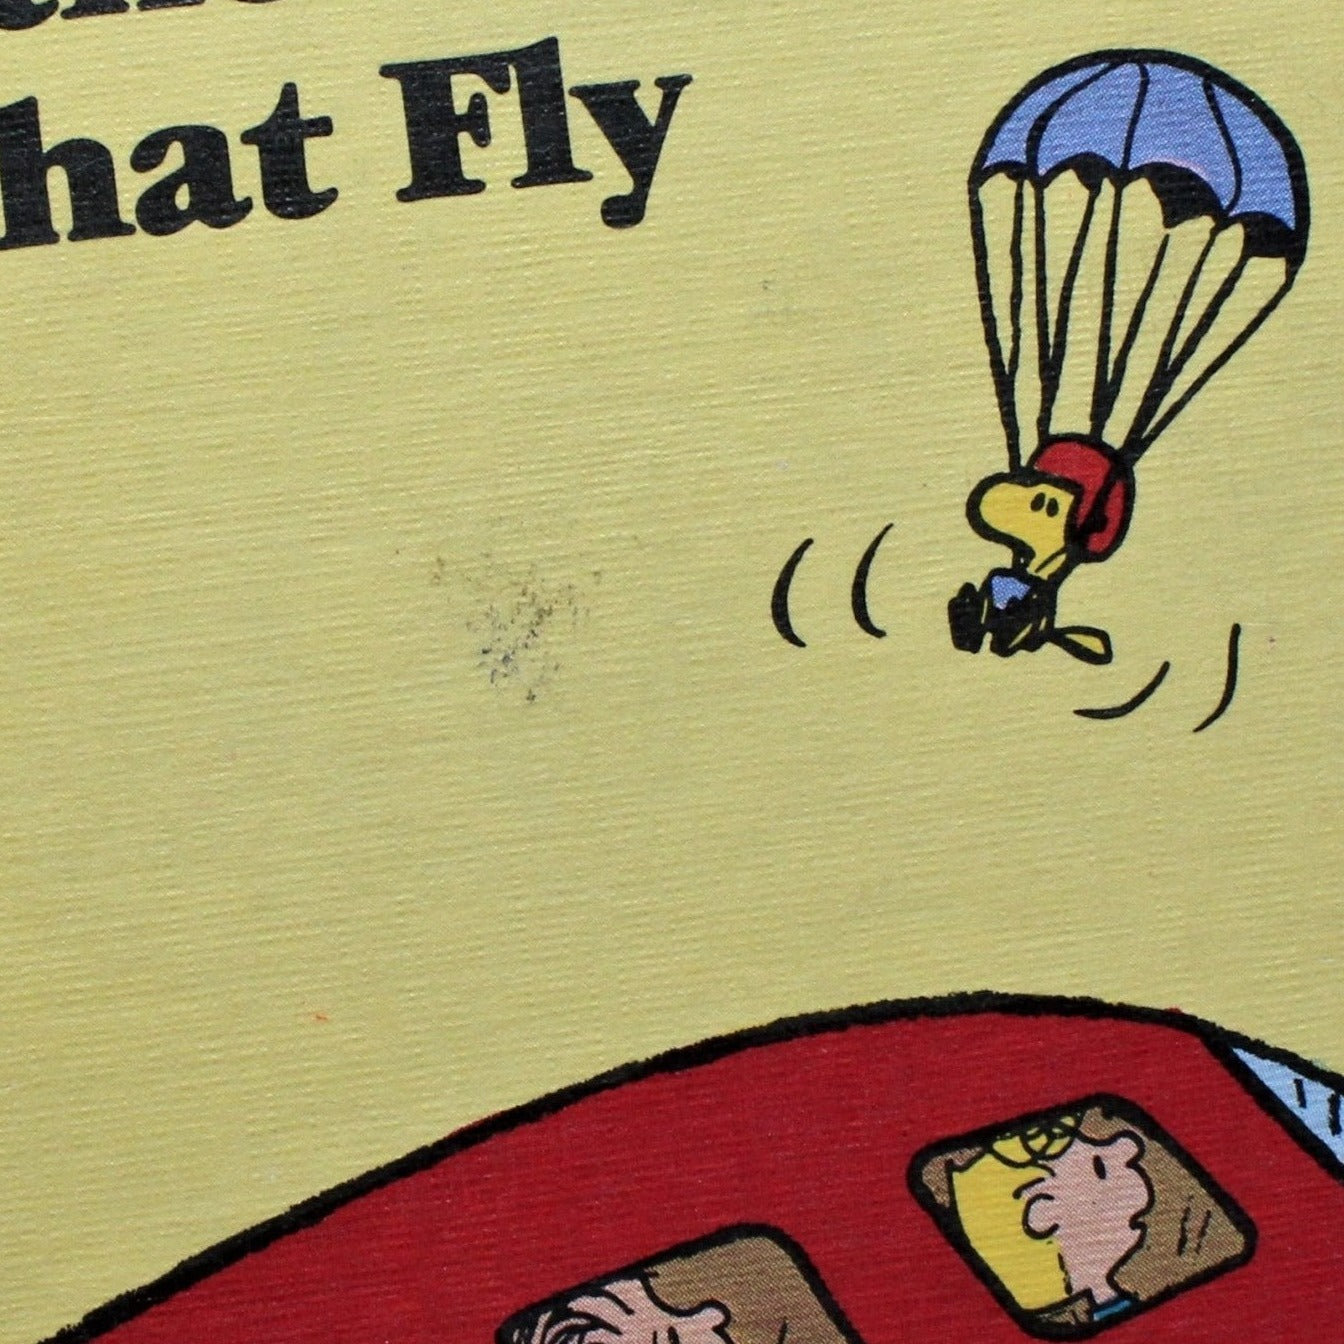 Children's Book, Charlie Brown's 'Cyclopedia, Planes & Other Things, Hardcover, Vintage 1980